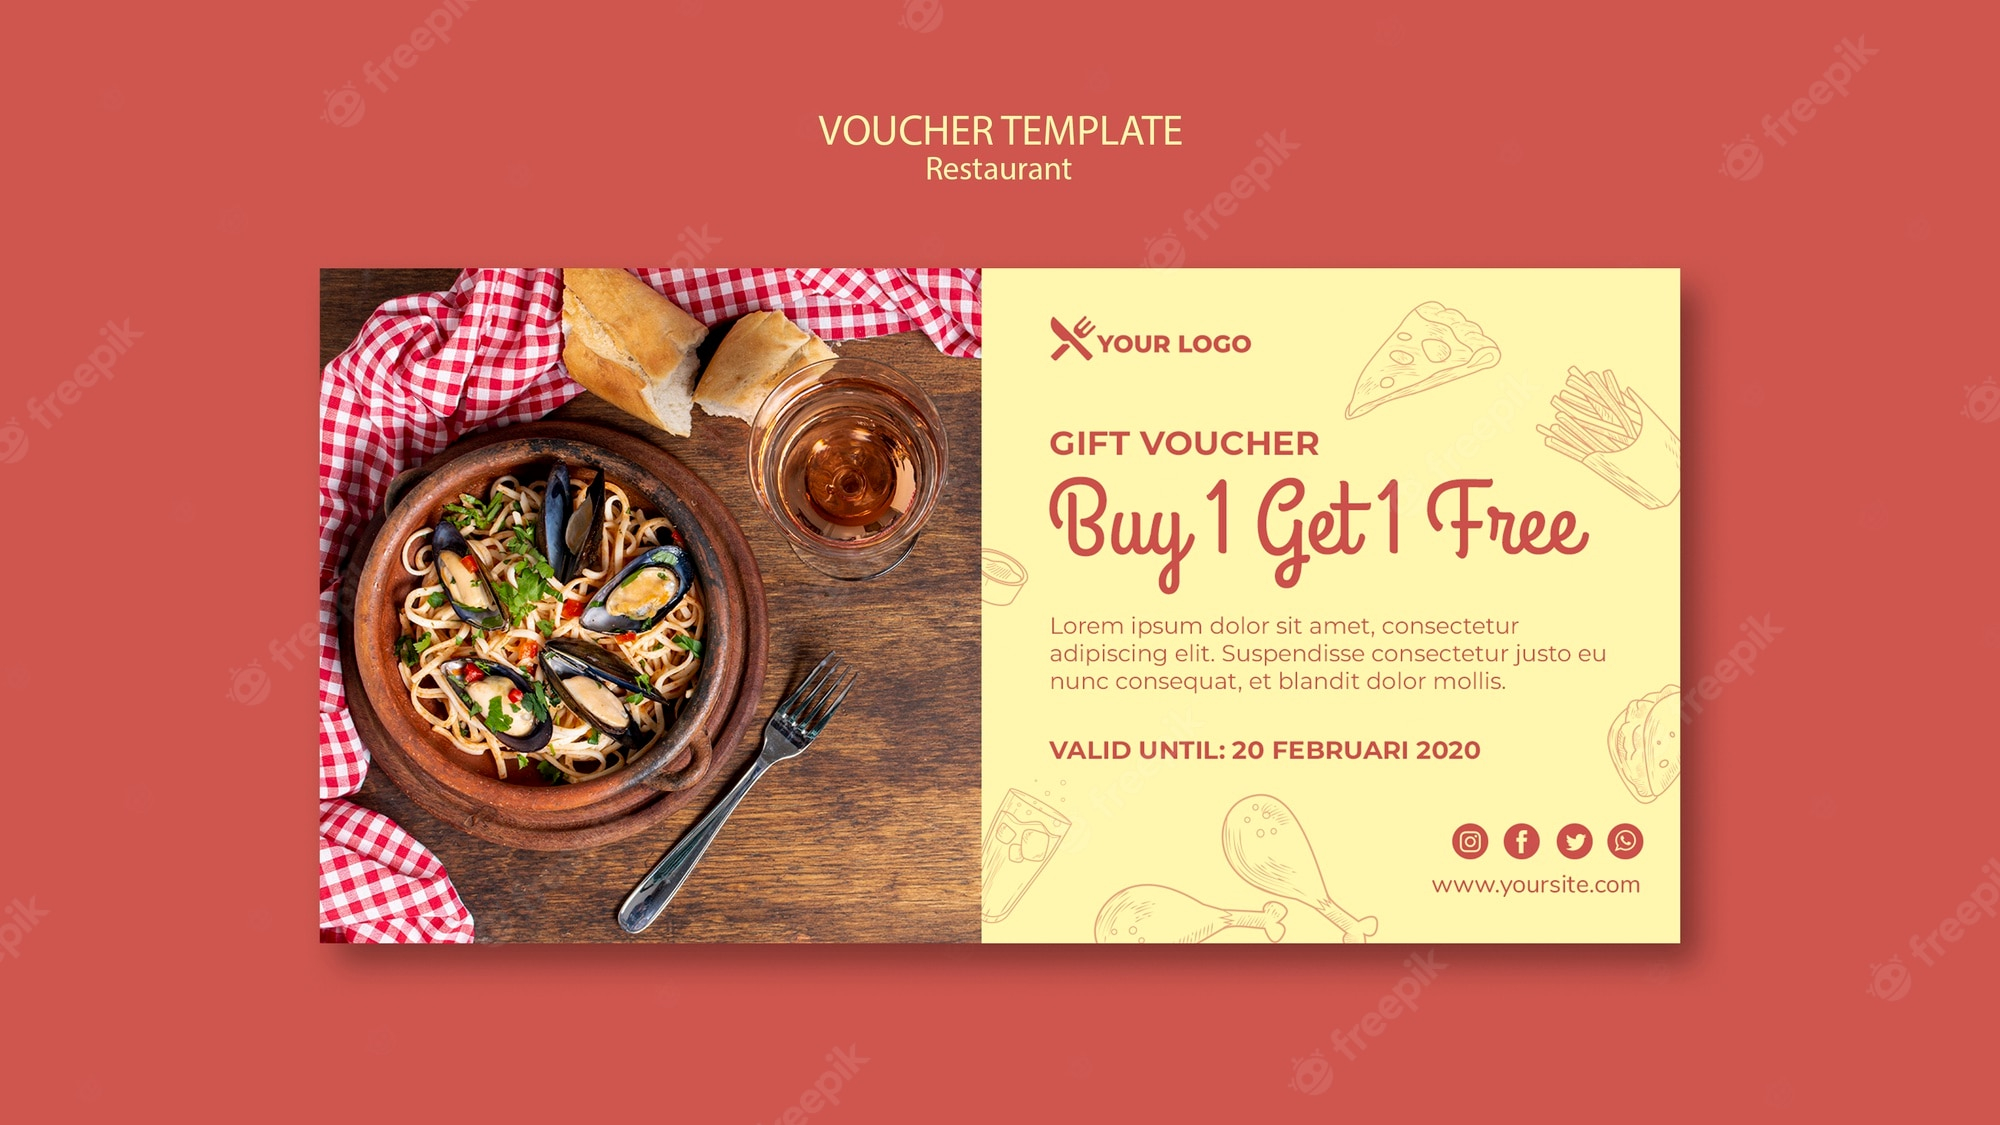 Restaurant gift voucher Images  Free Vectors, Stock Photos & PSD In Dinner Certificate Template Free